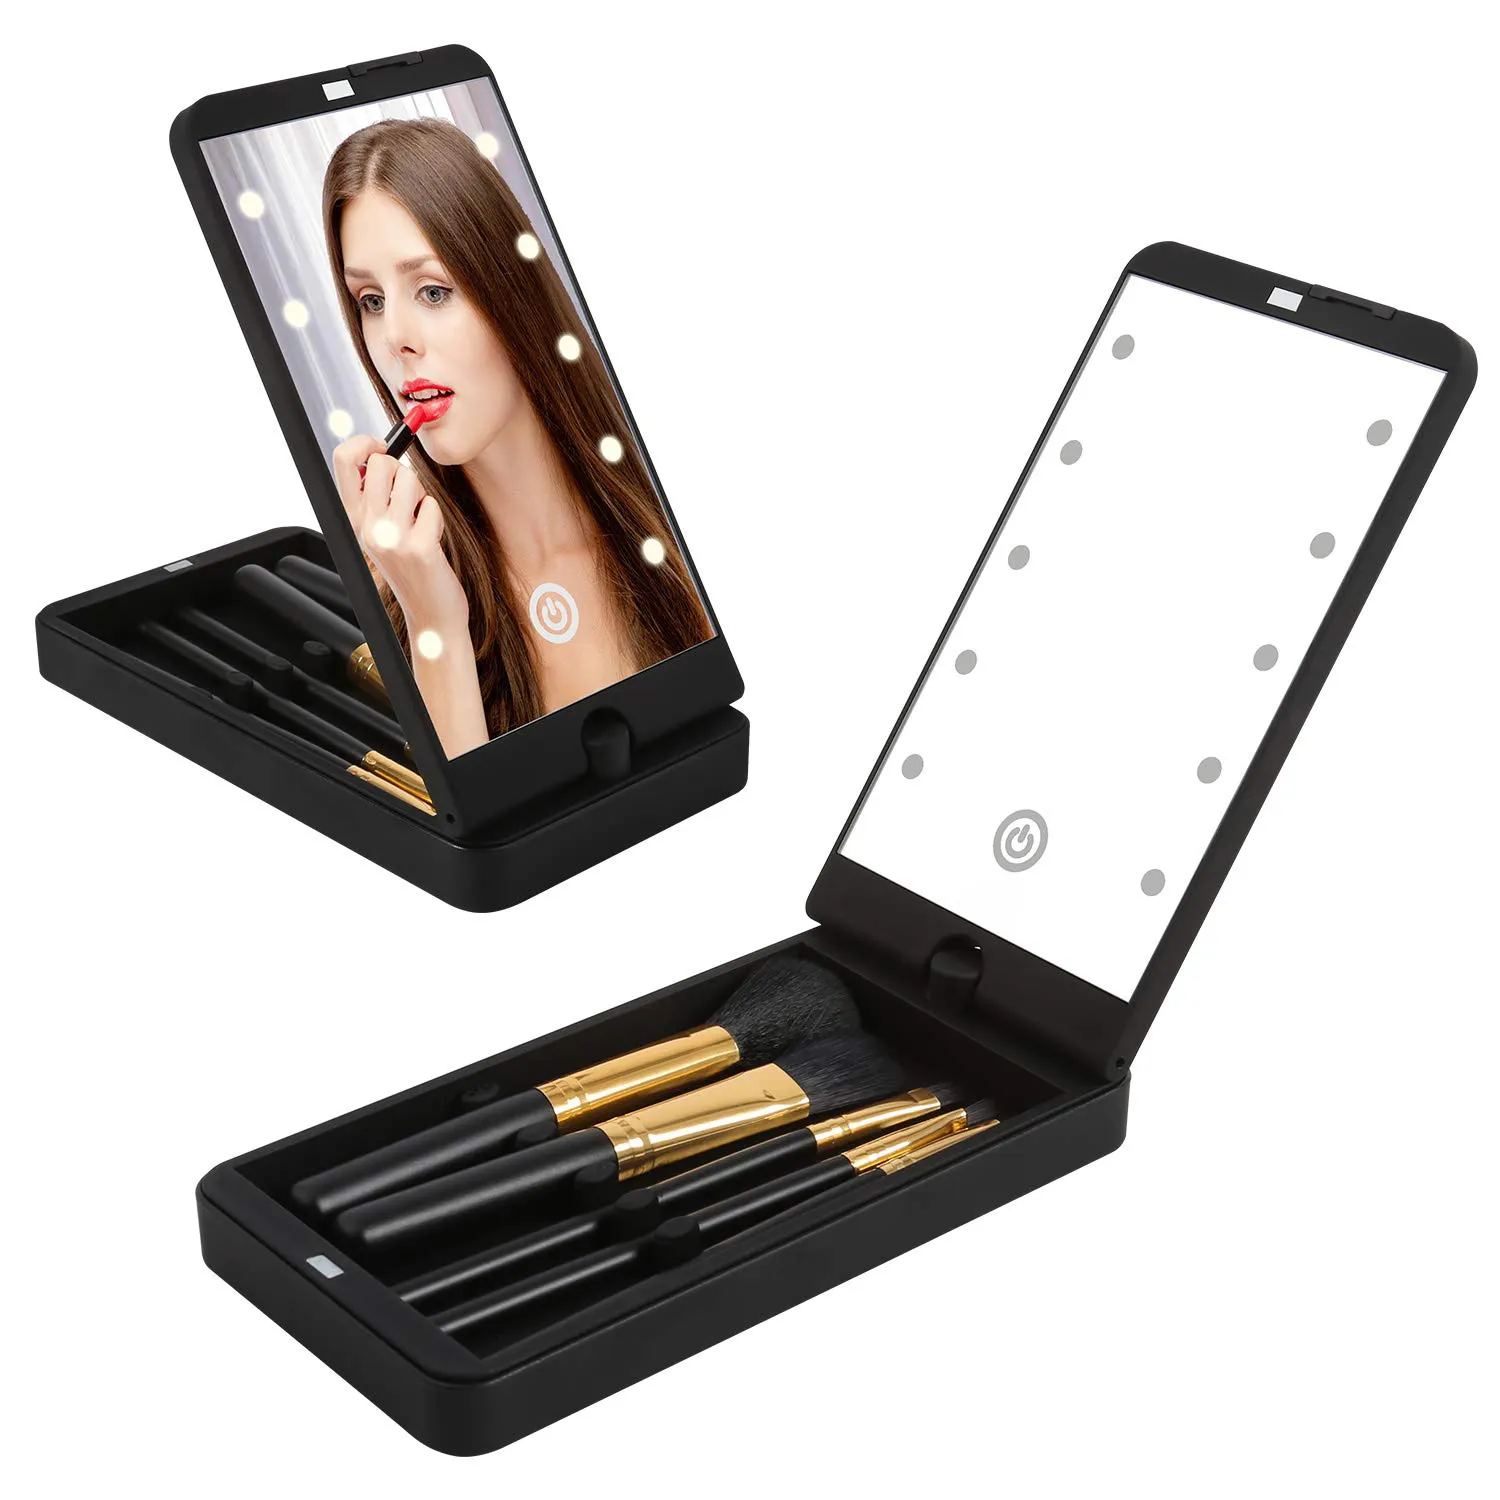 2022 ONULISS OEM Vanity Makeup Mirror with Led Light Compact Make Up Mirror